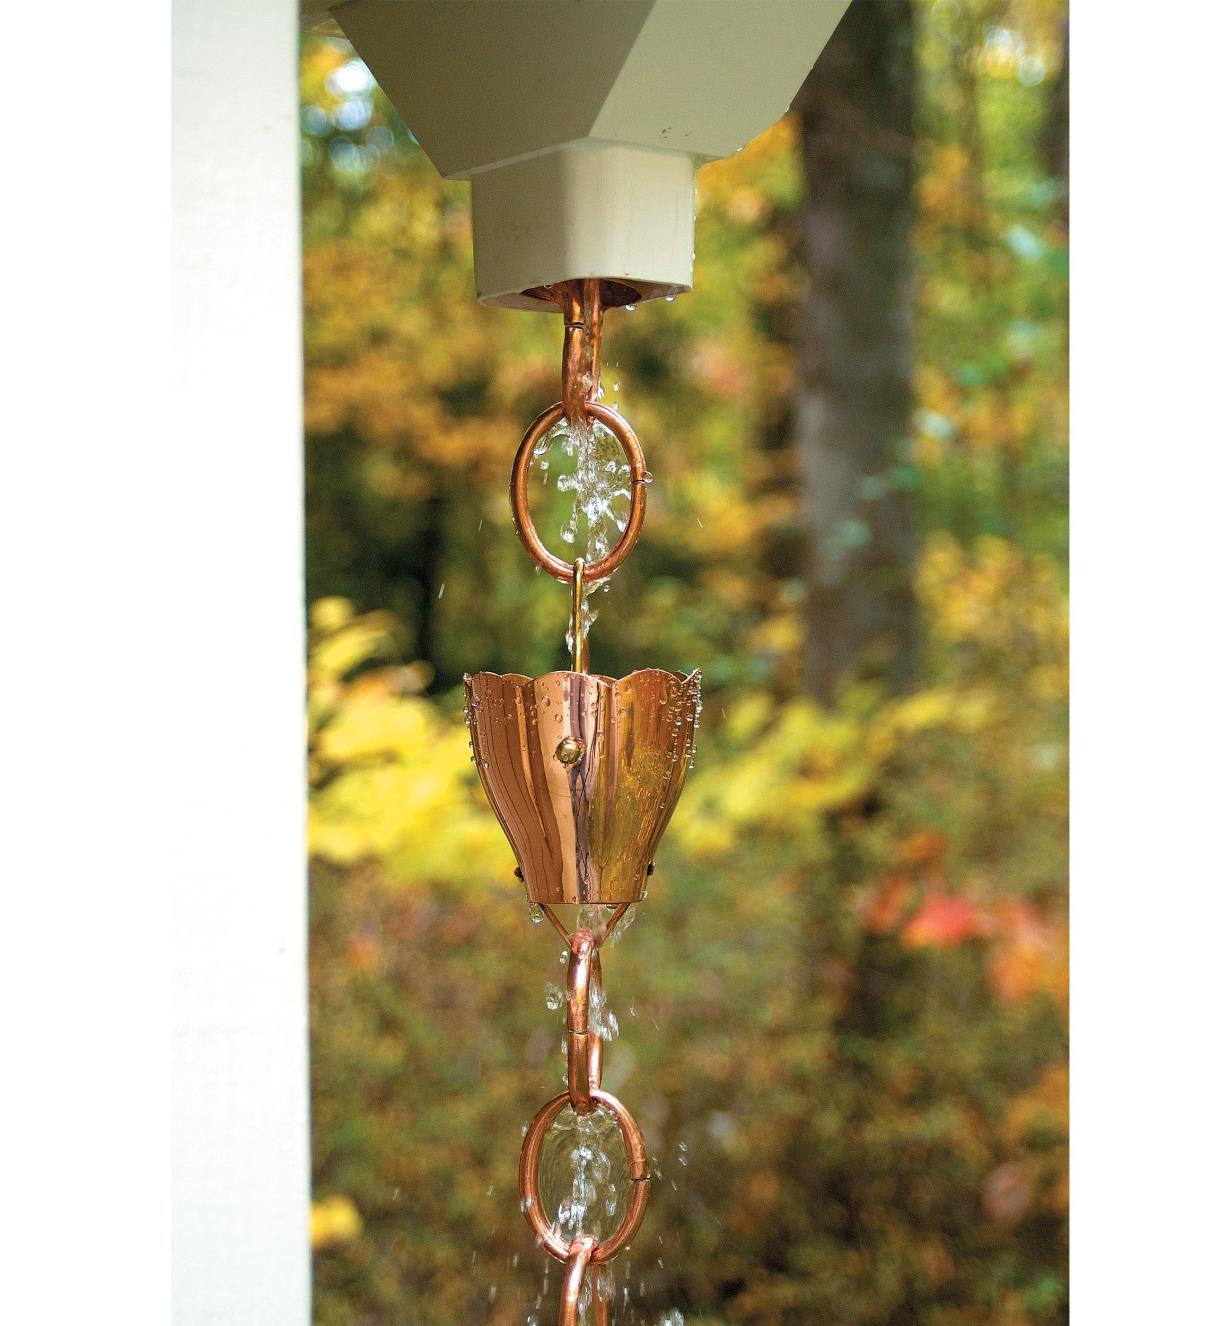 Water from a downspout opening cascades through the fluted funnels on the copper rain chain